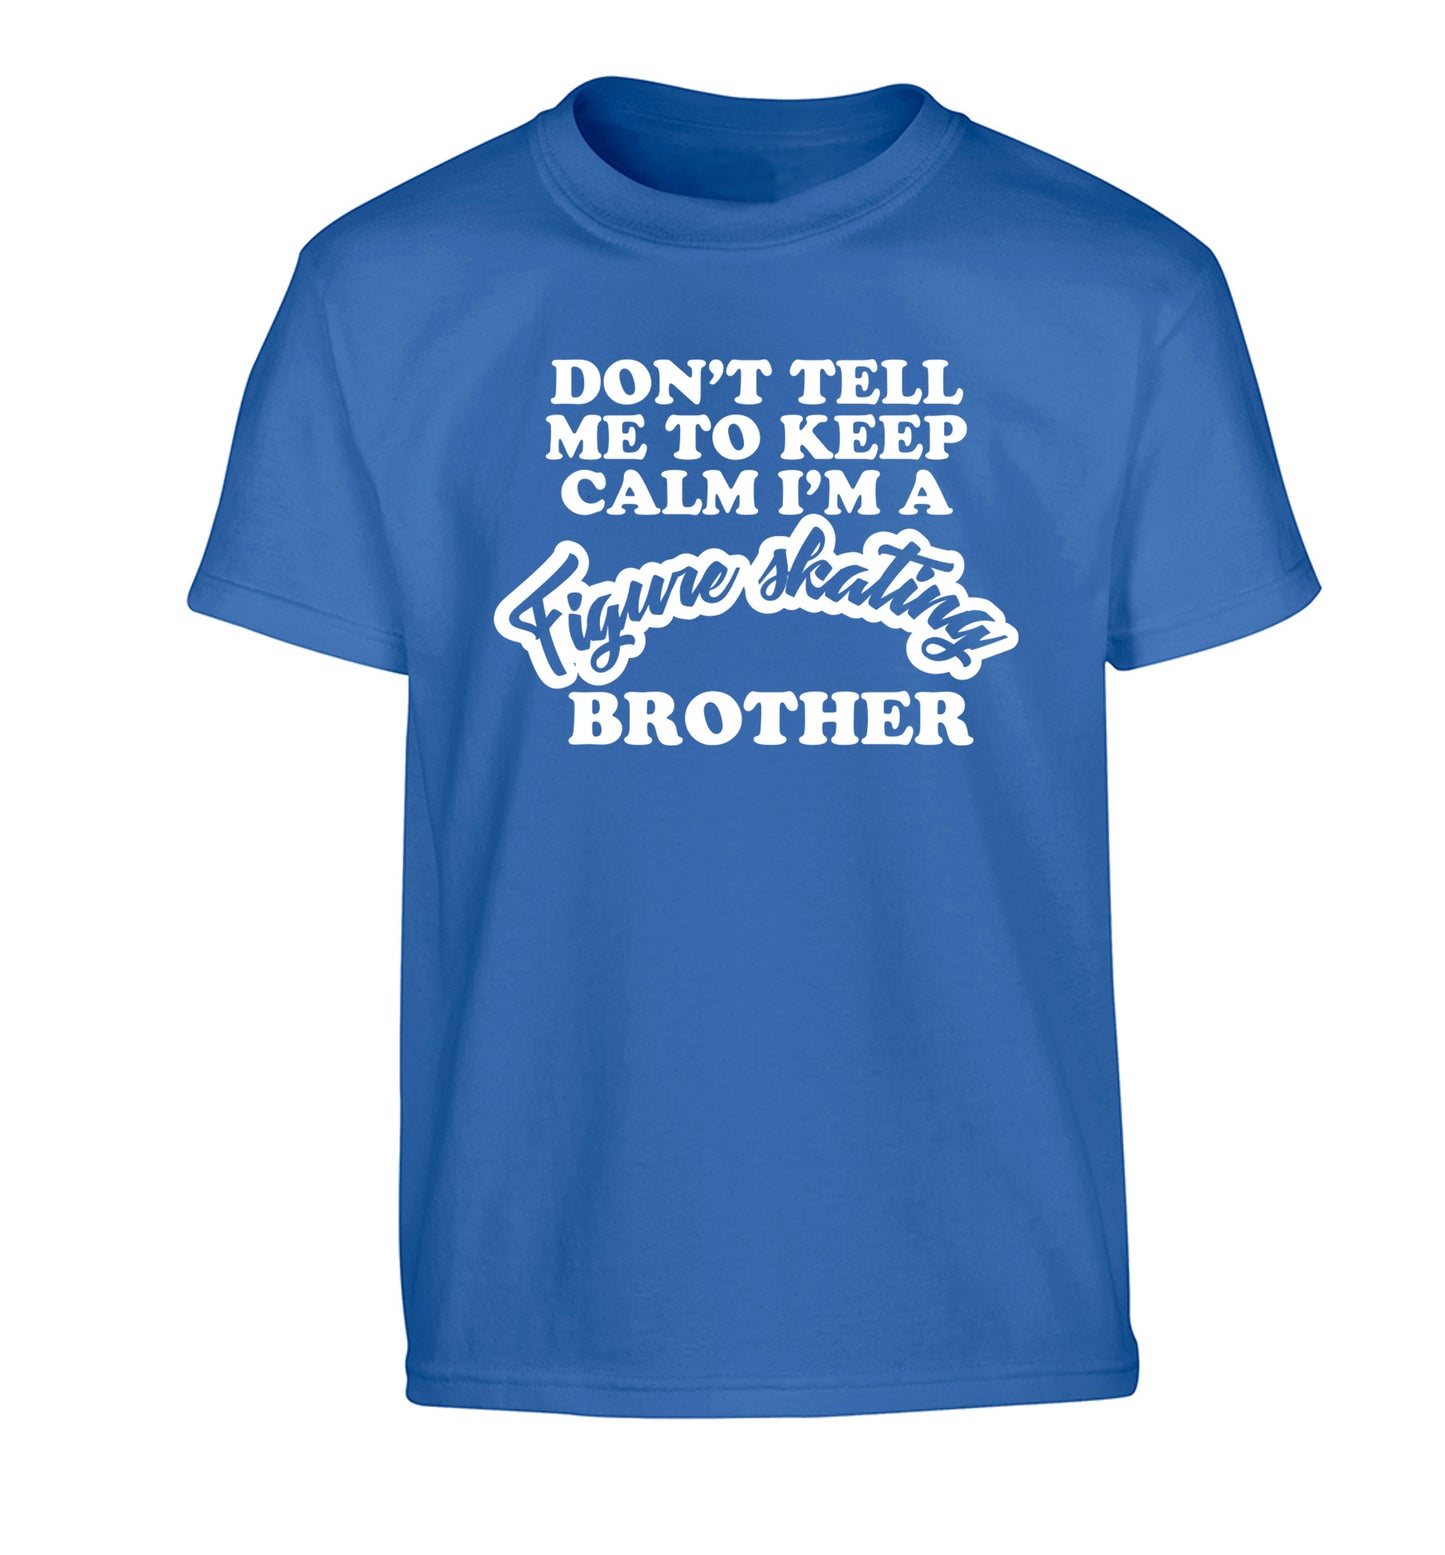 Don't tell me to keep calm I'm a figure skating brother Children's blue Tshirt 12-14 Years